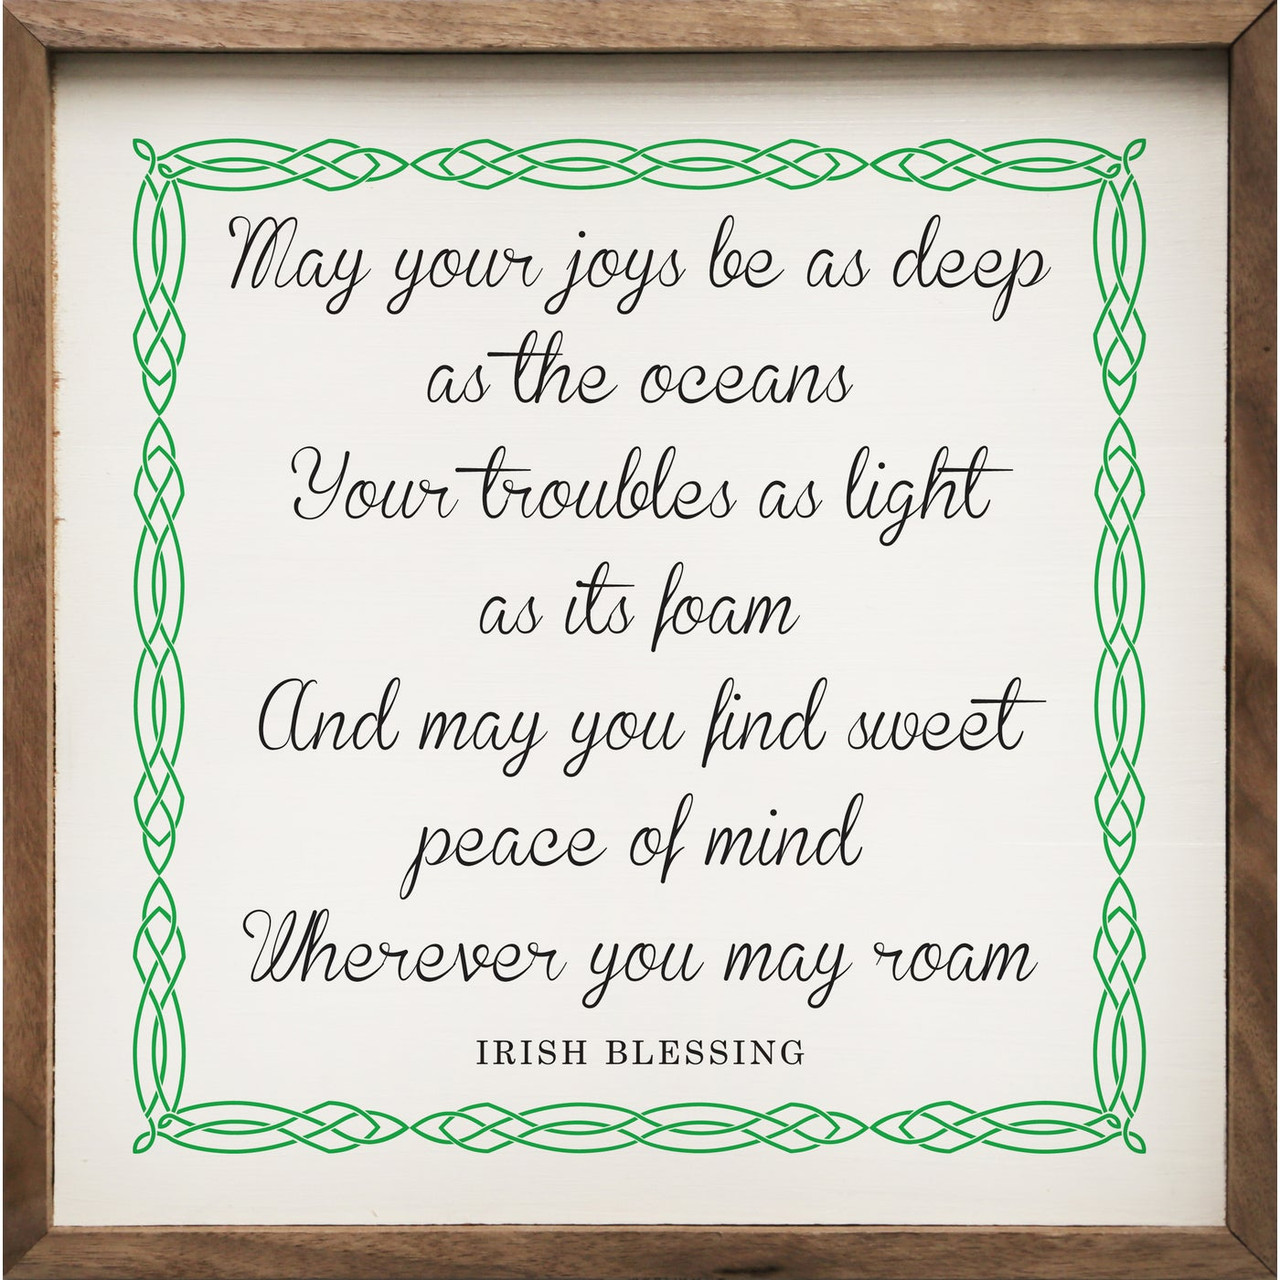 May Your Joys Be As Deep As The Oceans - Irish Blessing - Wood Framed Sign  - Country Marketplace